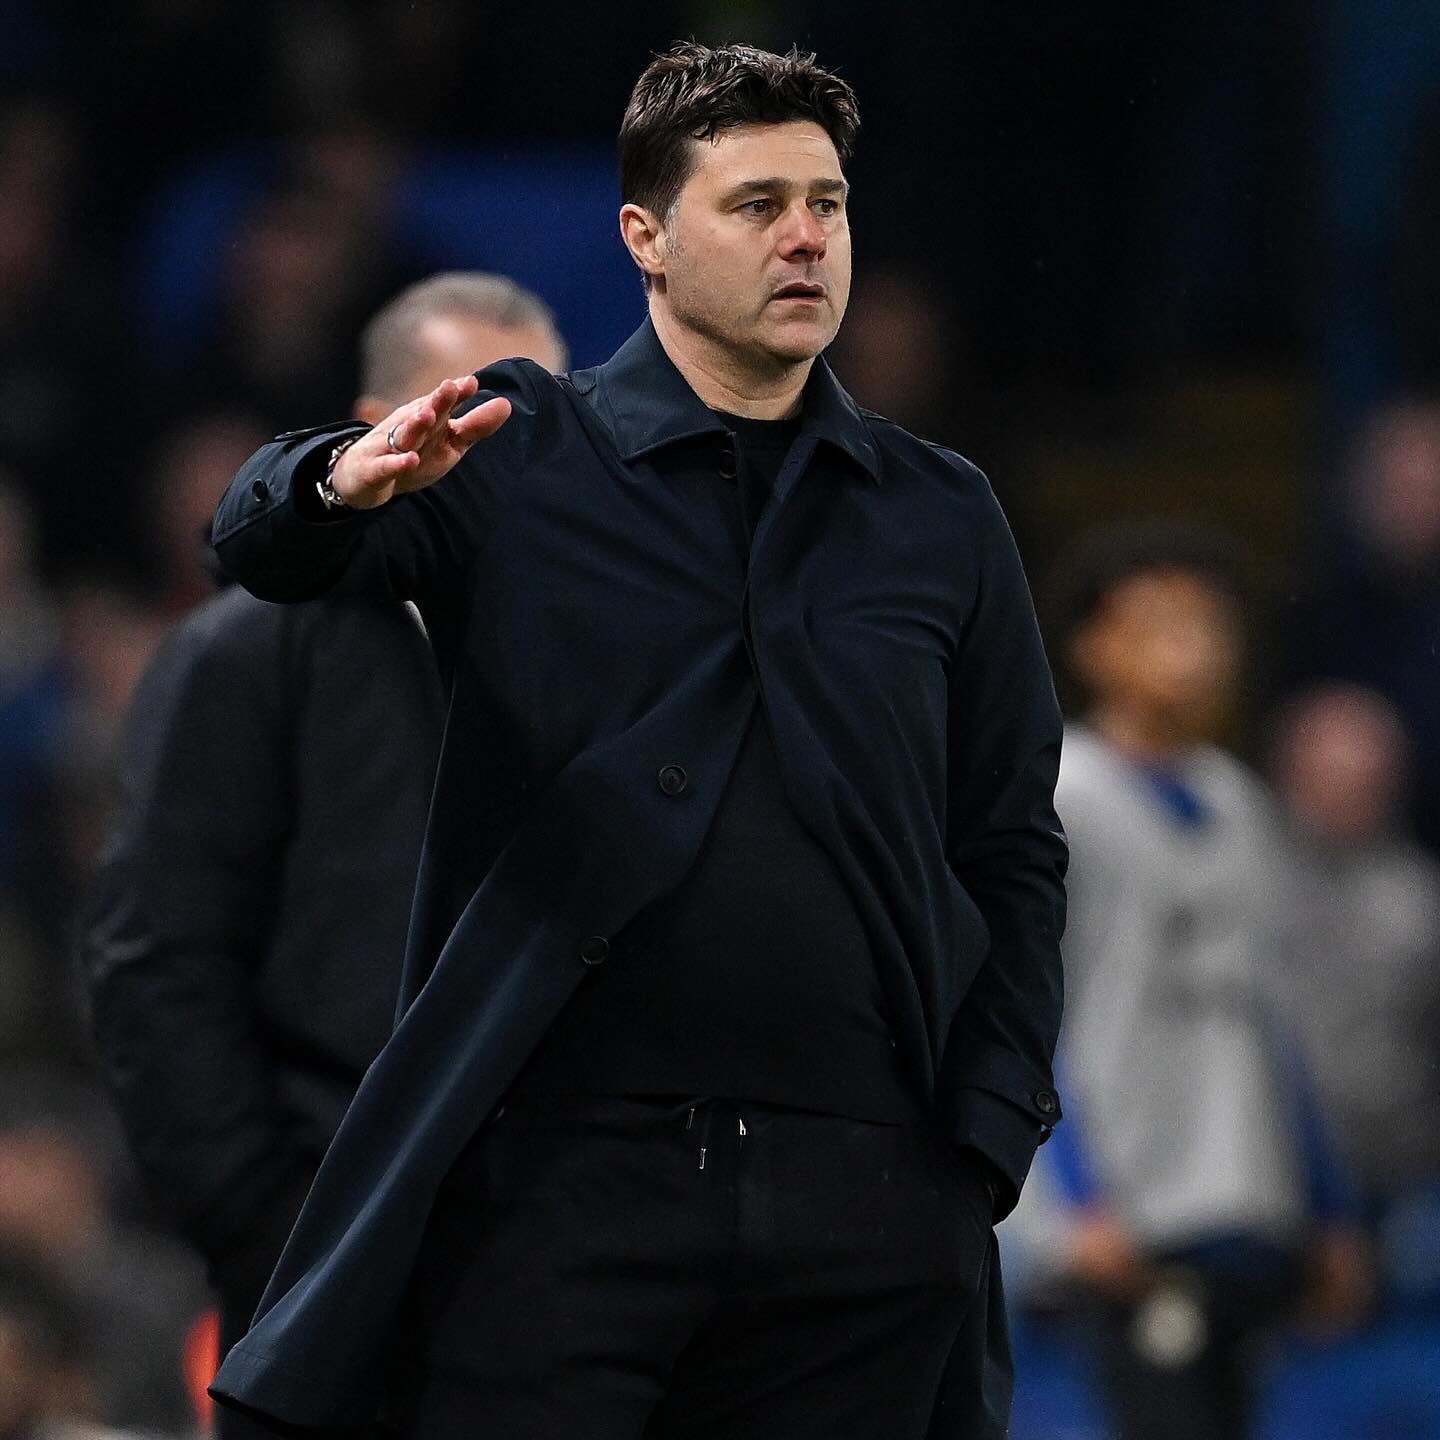 Mauricio Pochettino and Chelsea parted ways in a mutual agreement